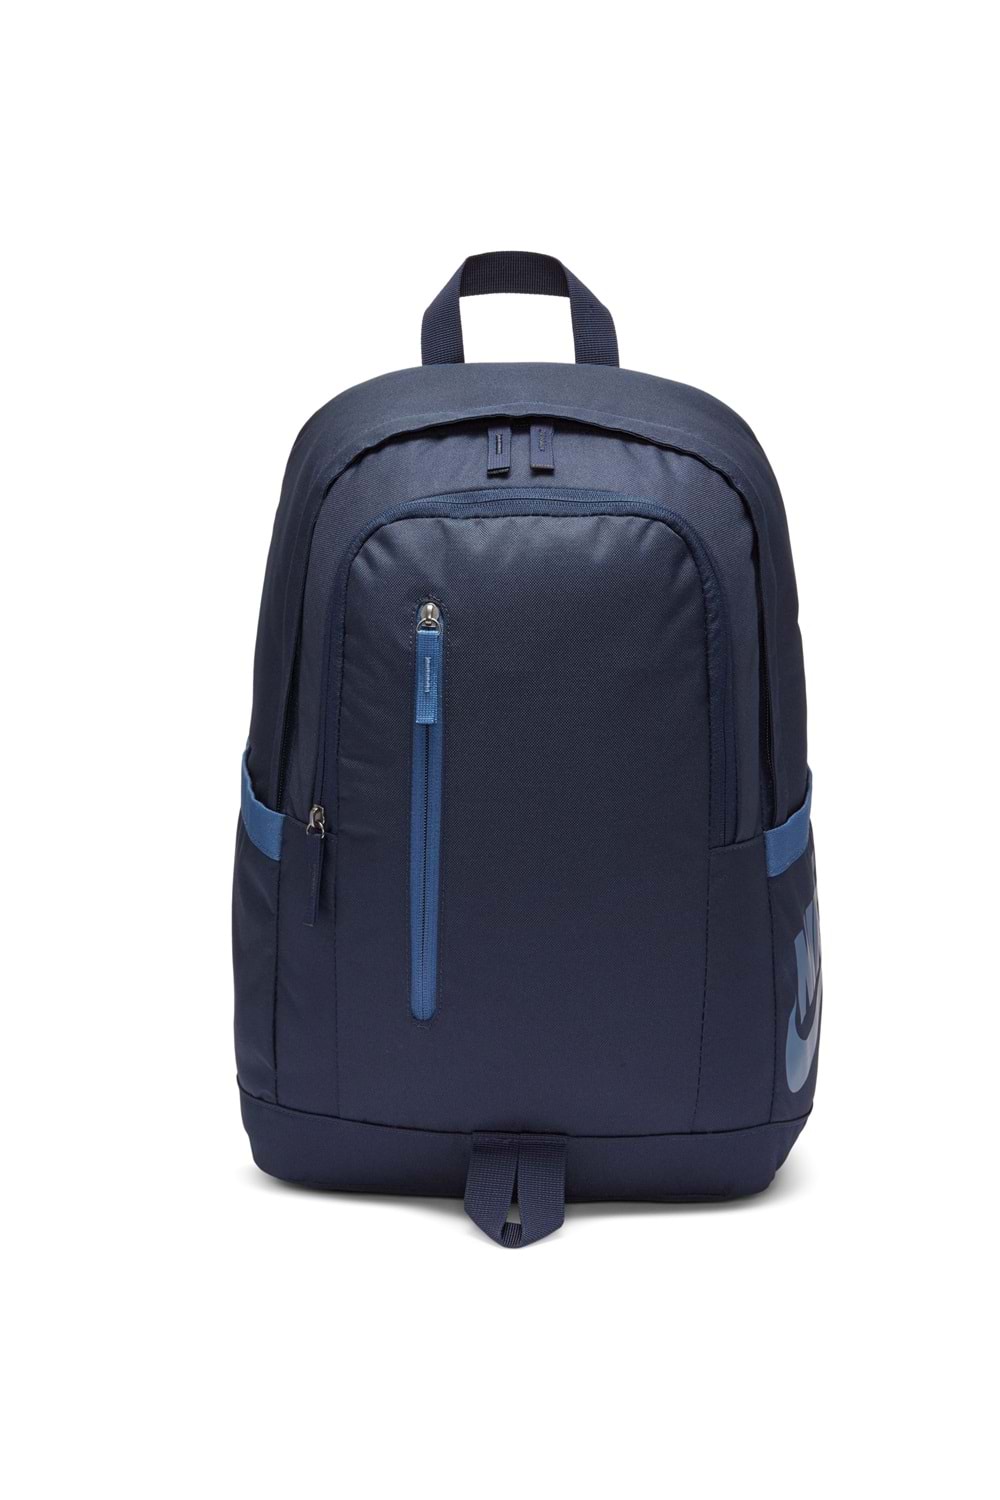 ALL ACCESS SOLEDAY BACKPACK